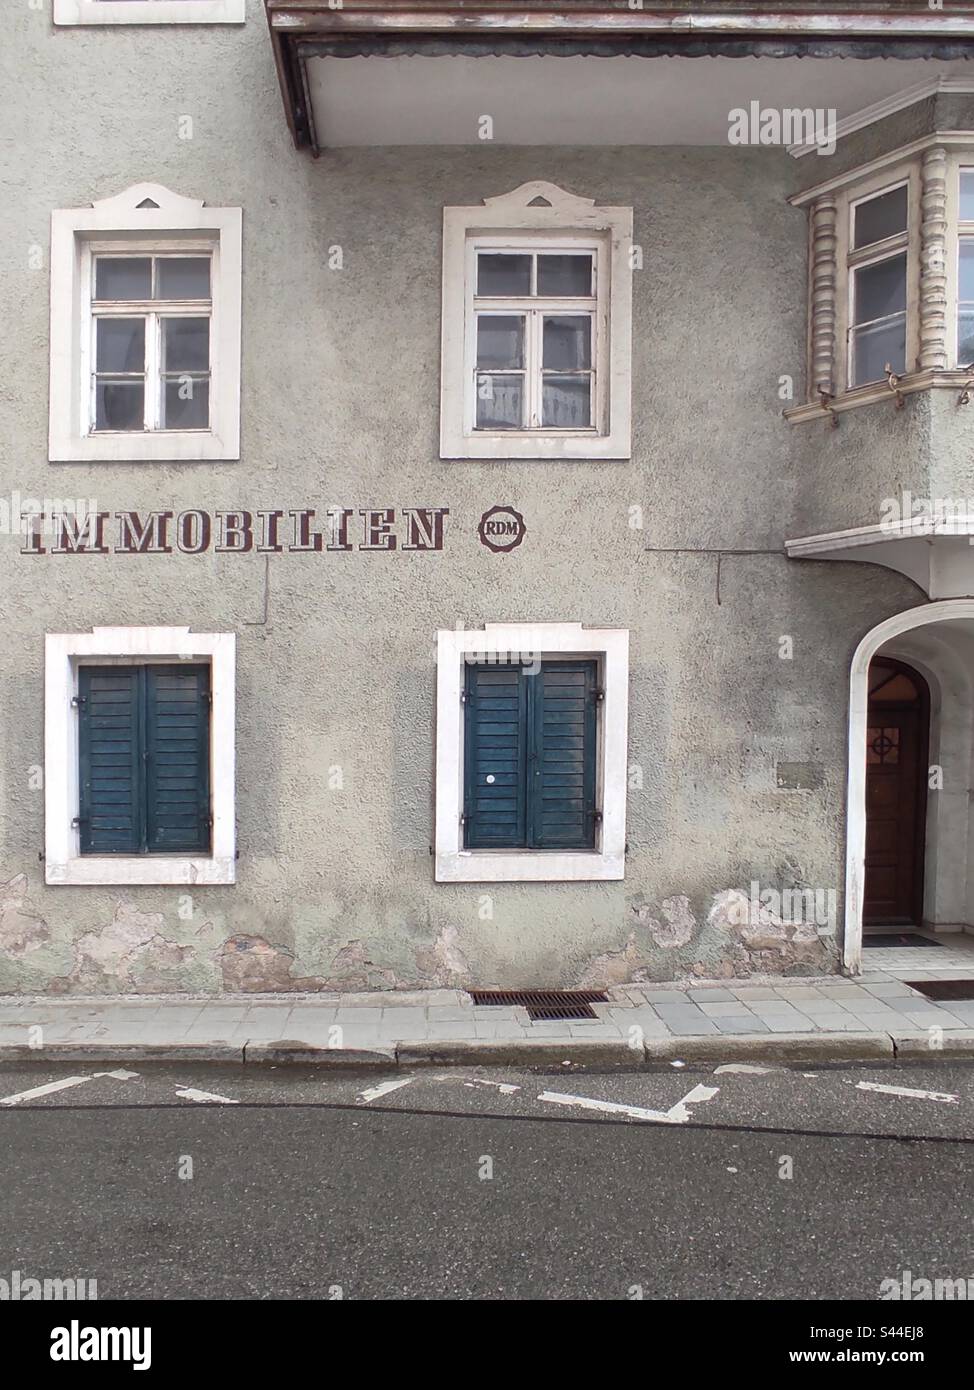 Old house in Germany with the painted word Immobilien advertising on the facade Stock Photo